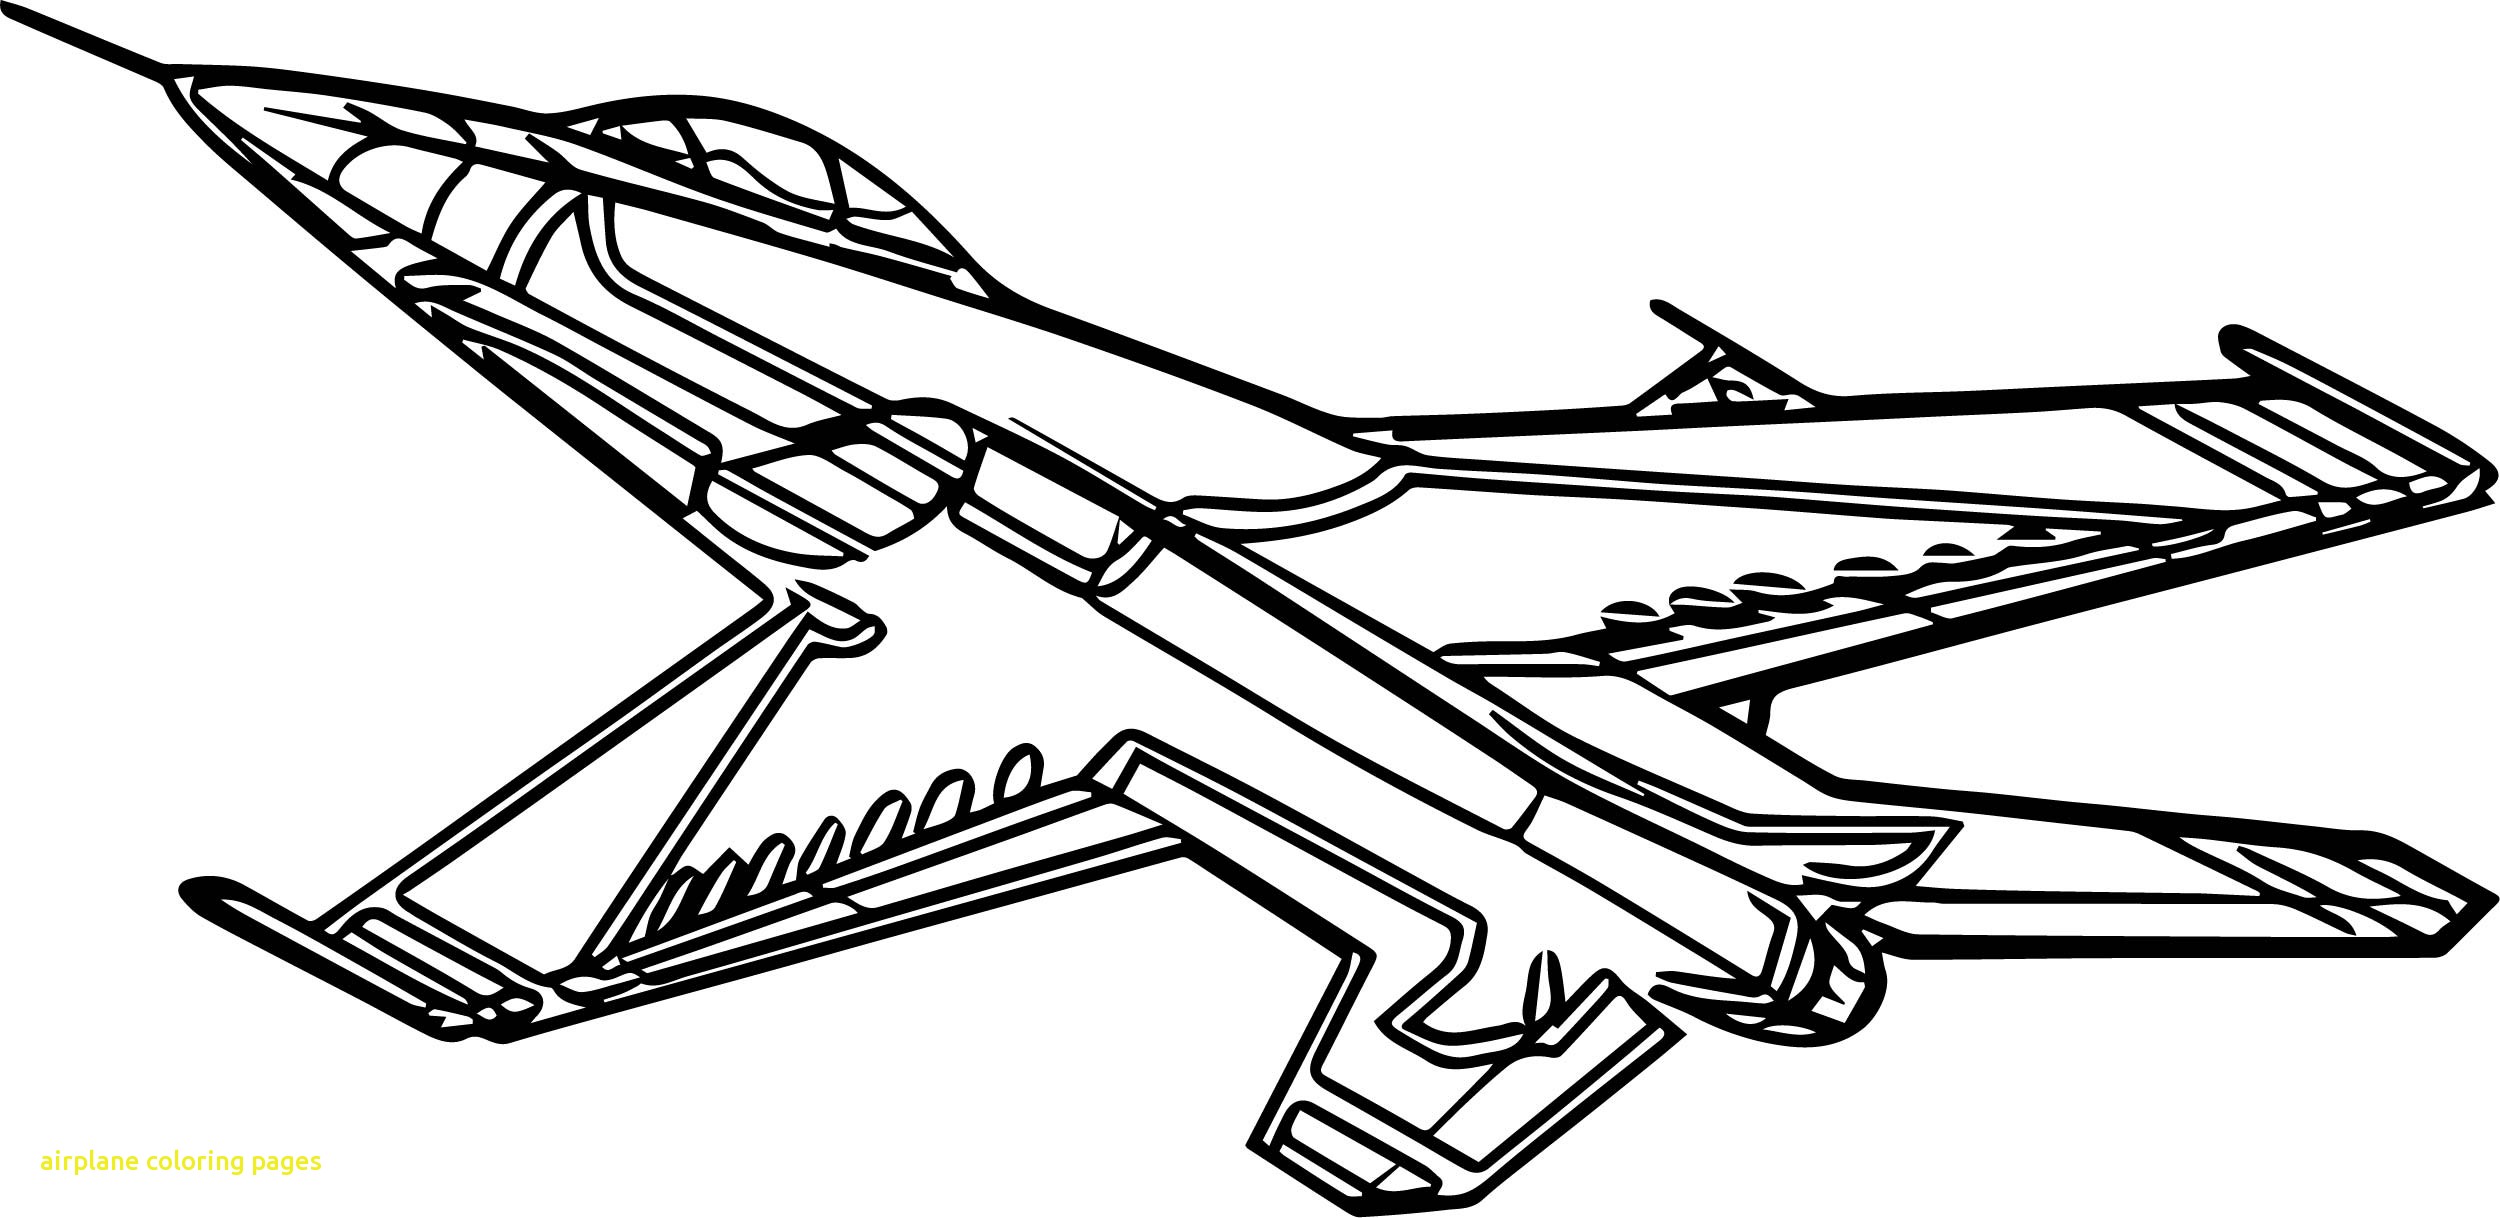 Air Force 1 Plane Coloring Page Free Printable Coloring Pages for Kids